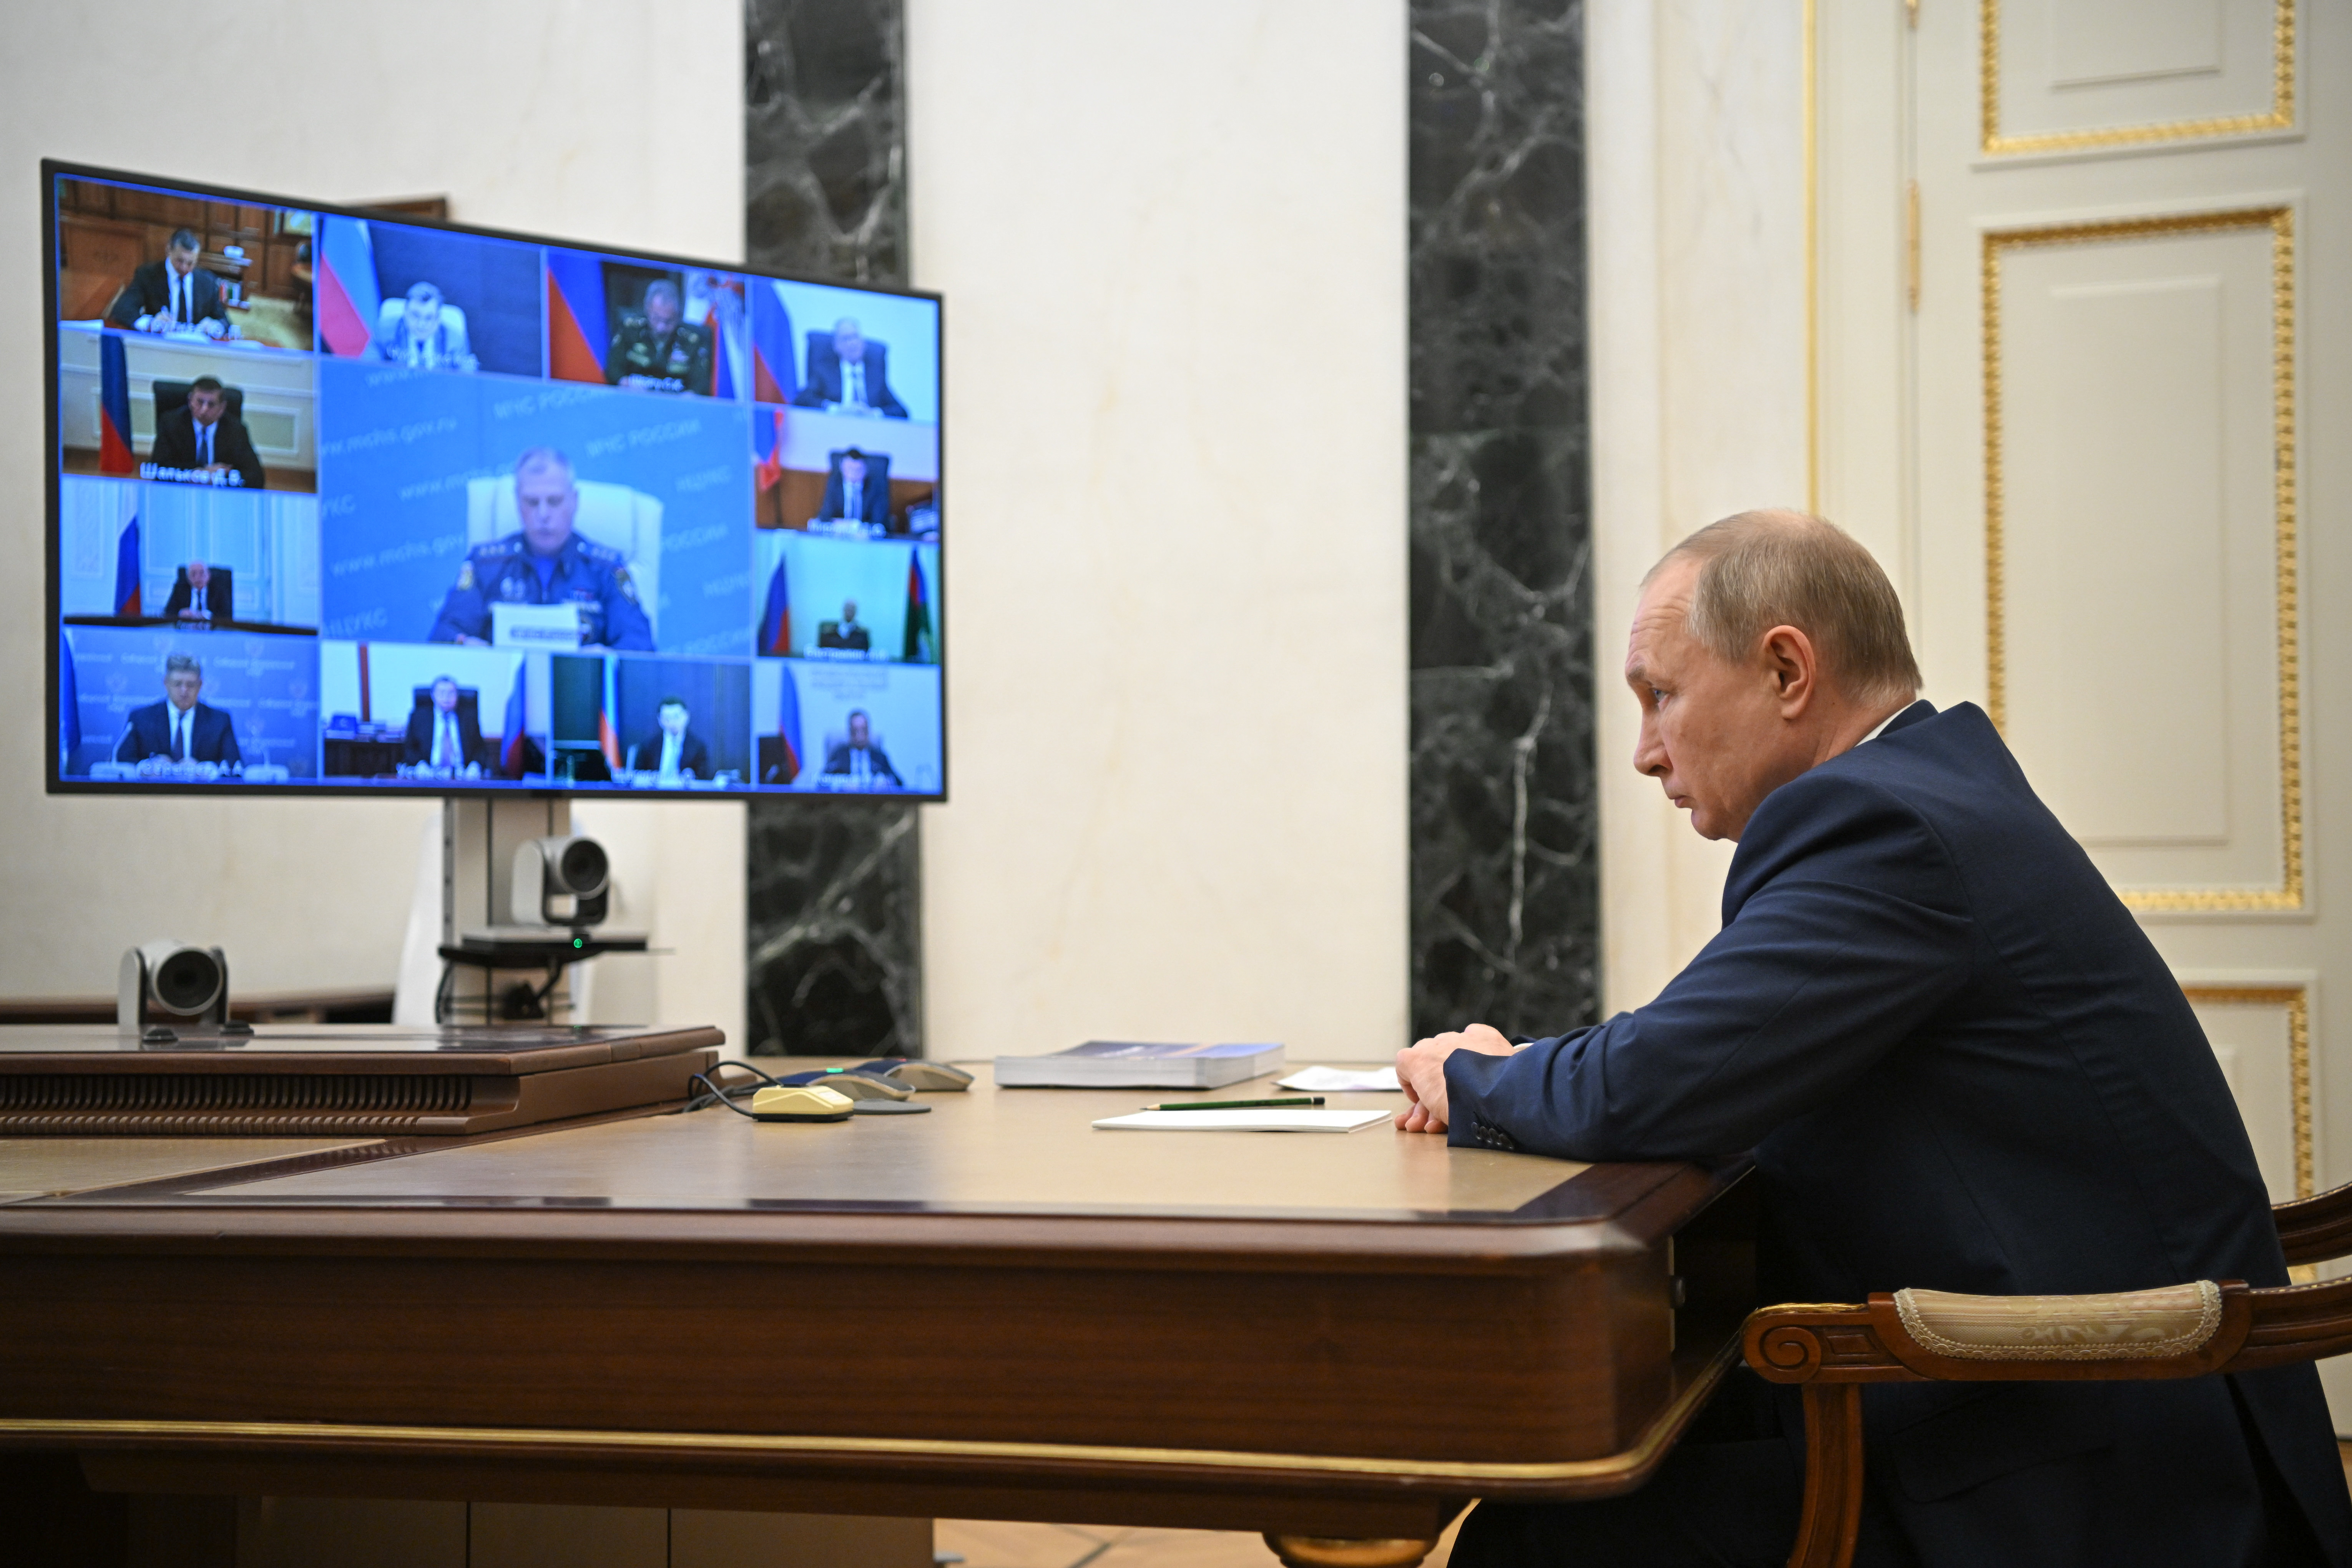 Putin sitting across from a large screen that shows several participants in the meeting.